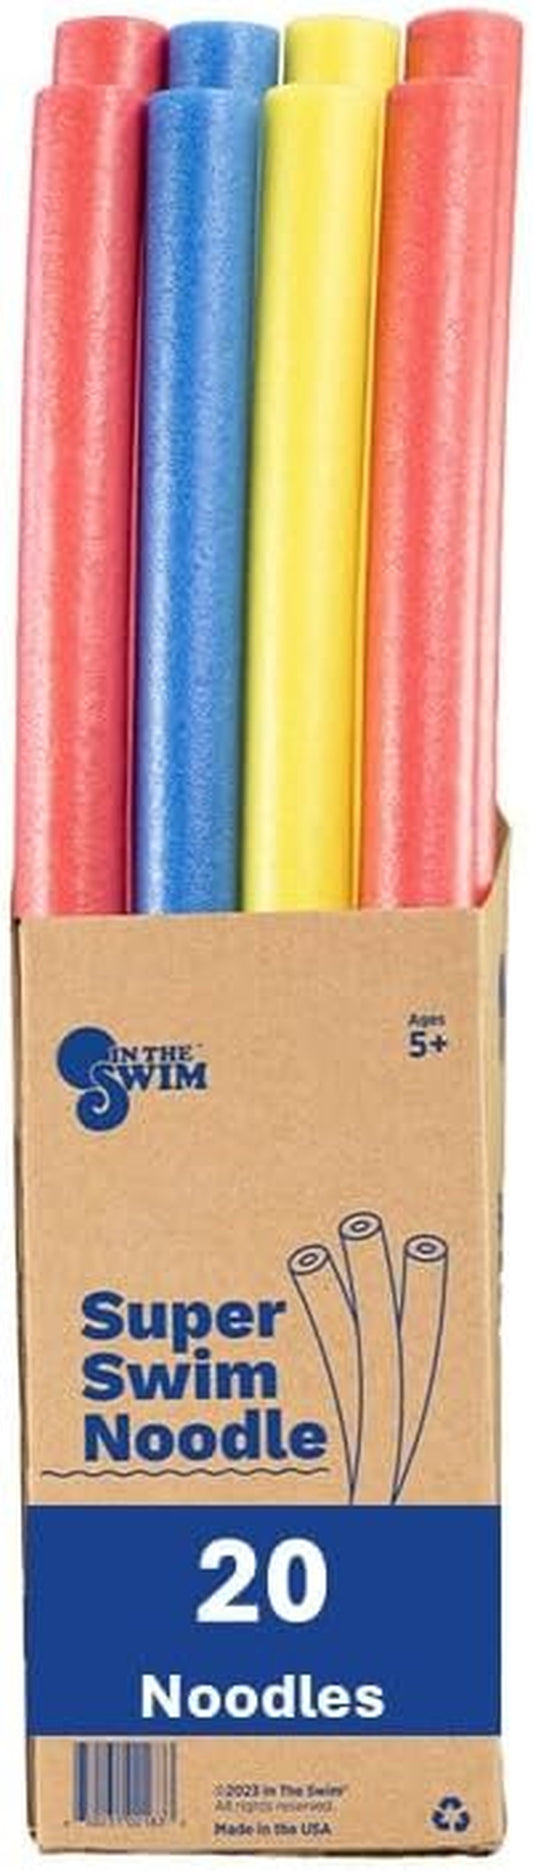 Pool Noodles – Soft Large Foam Noodles for Extra Buoyancy - Floating Training Device, Exercise Aid, Pool Toy - 50 Inches Long - 3 Assorted Colors